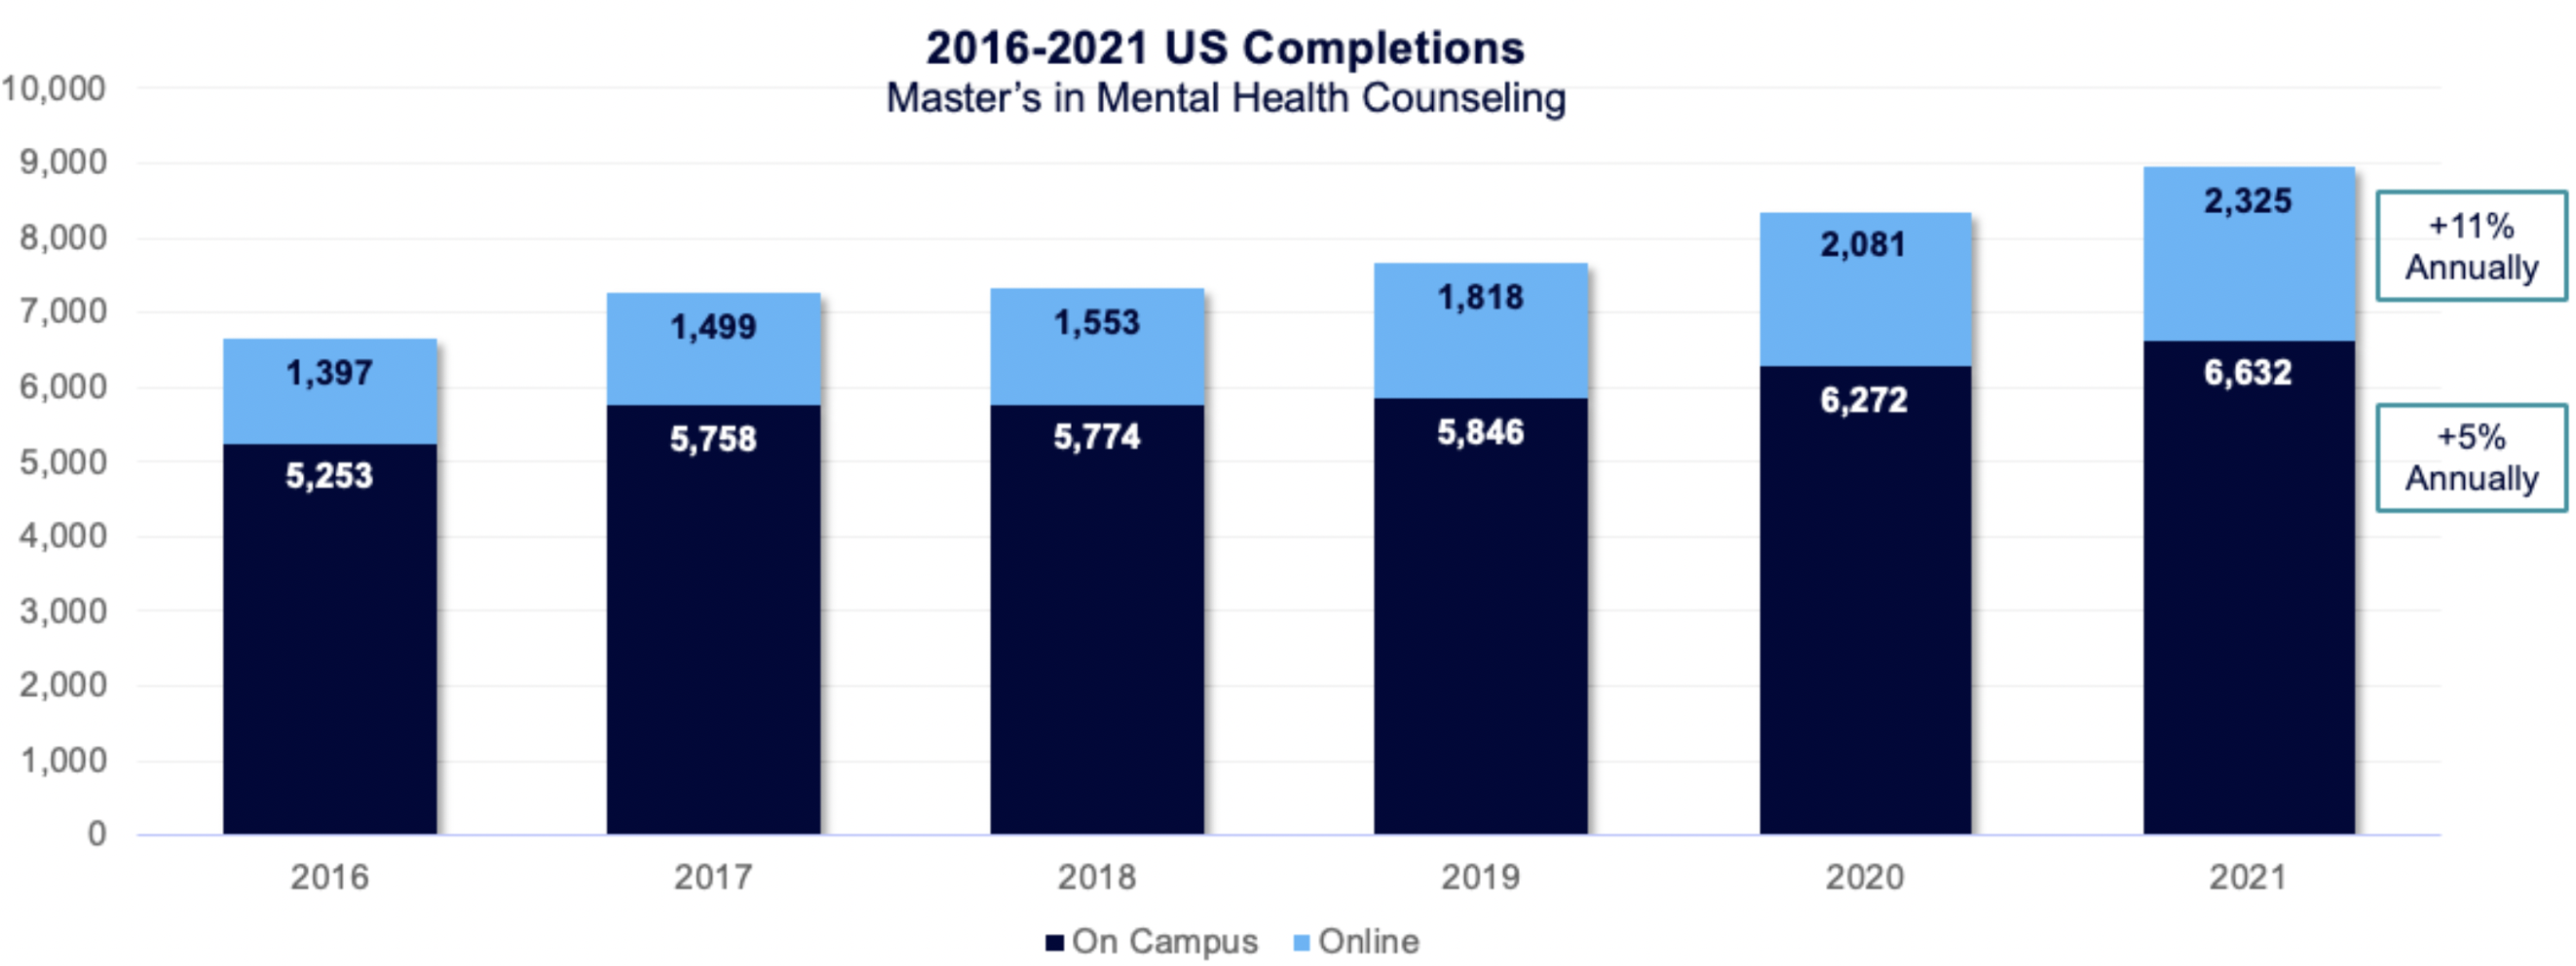 2016-2021 Us Completions: Master's in Mental Health Counseling